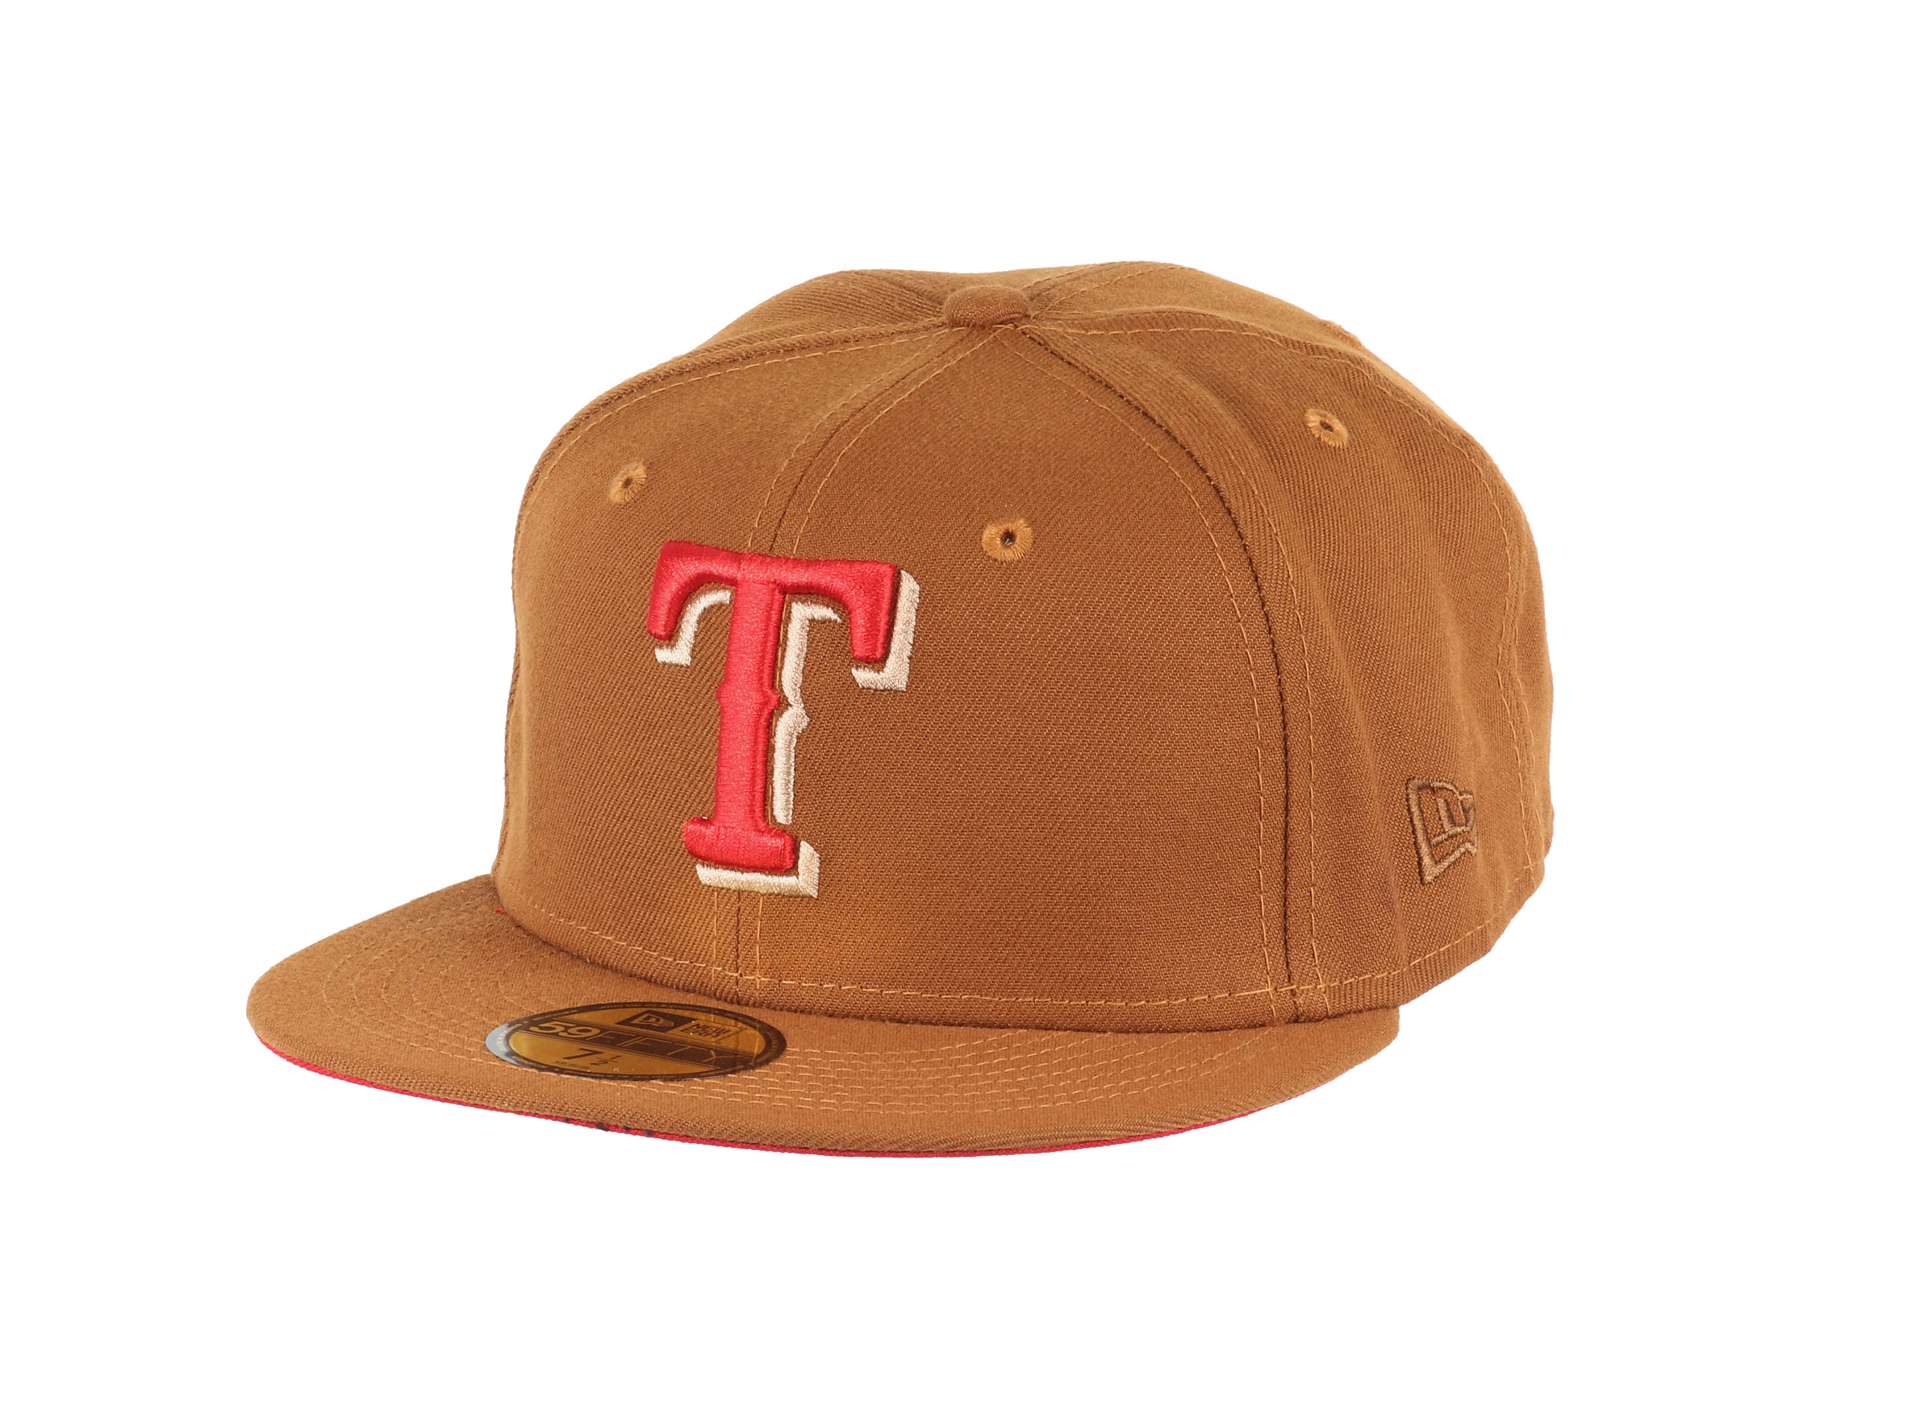 Texas Rangers MLB Cooperstown All-Star Game 1995 Sidepatch Toasted Peanut 59Fifty Basecap New Era